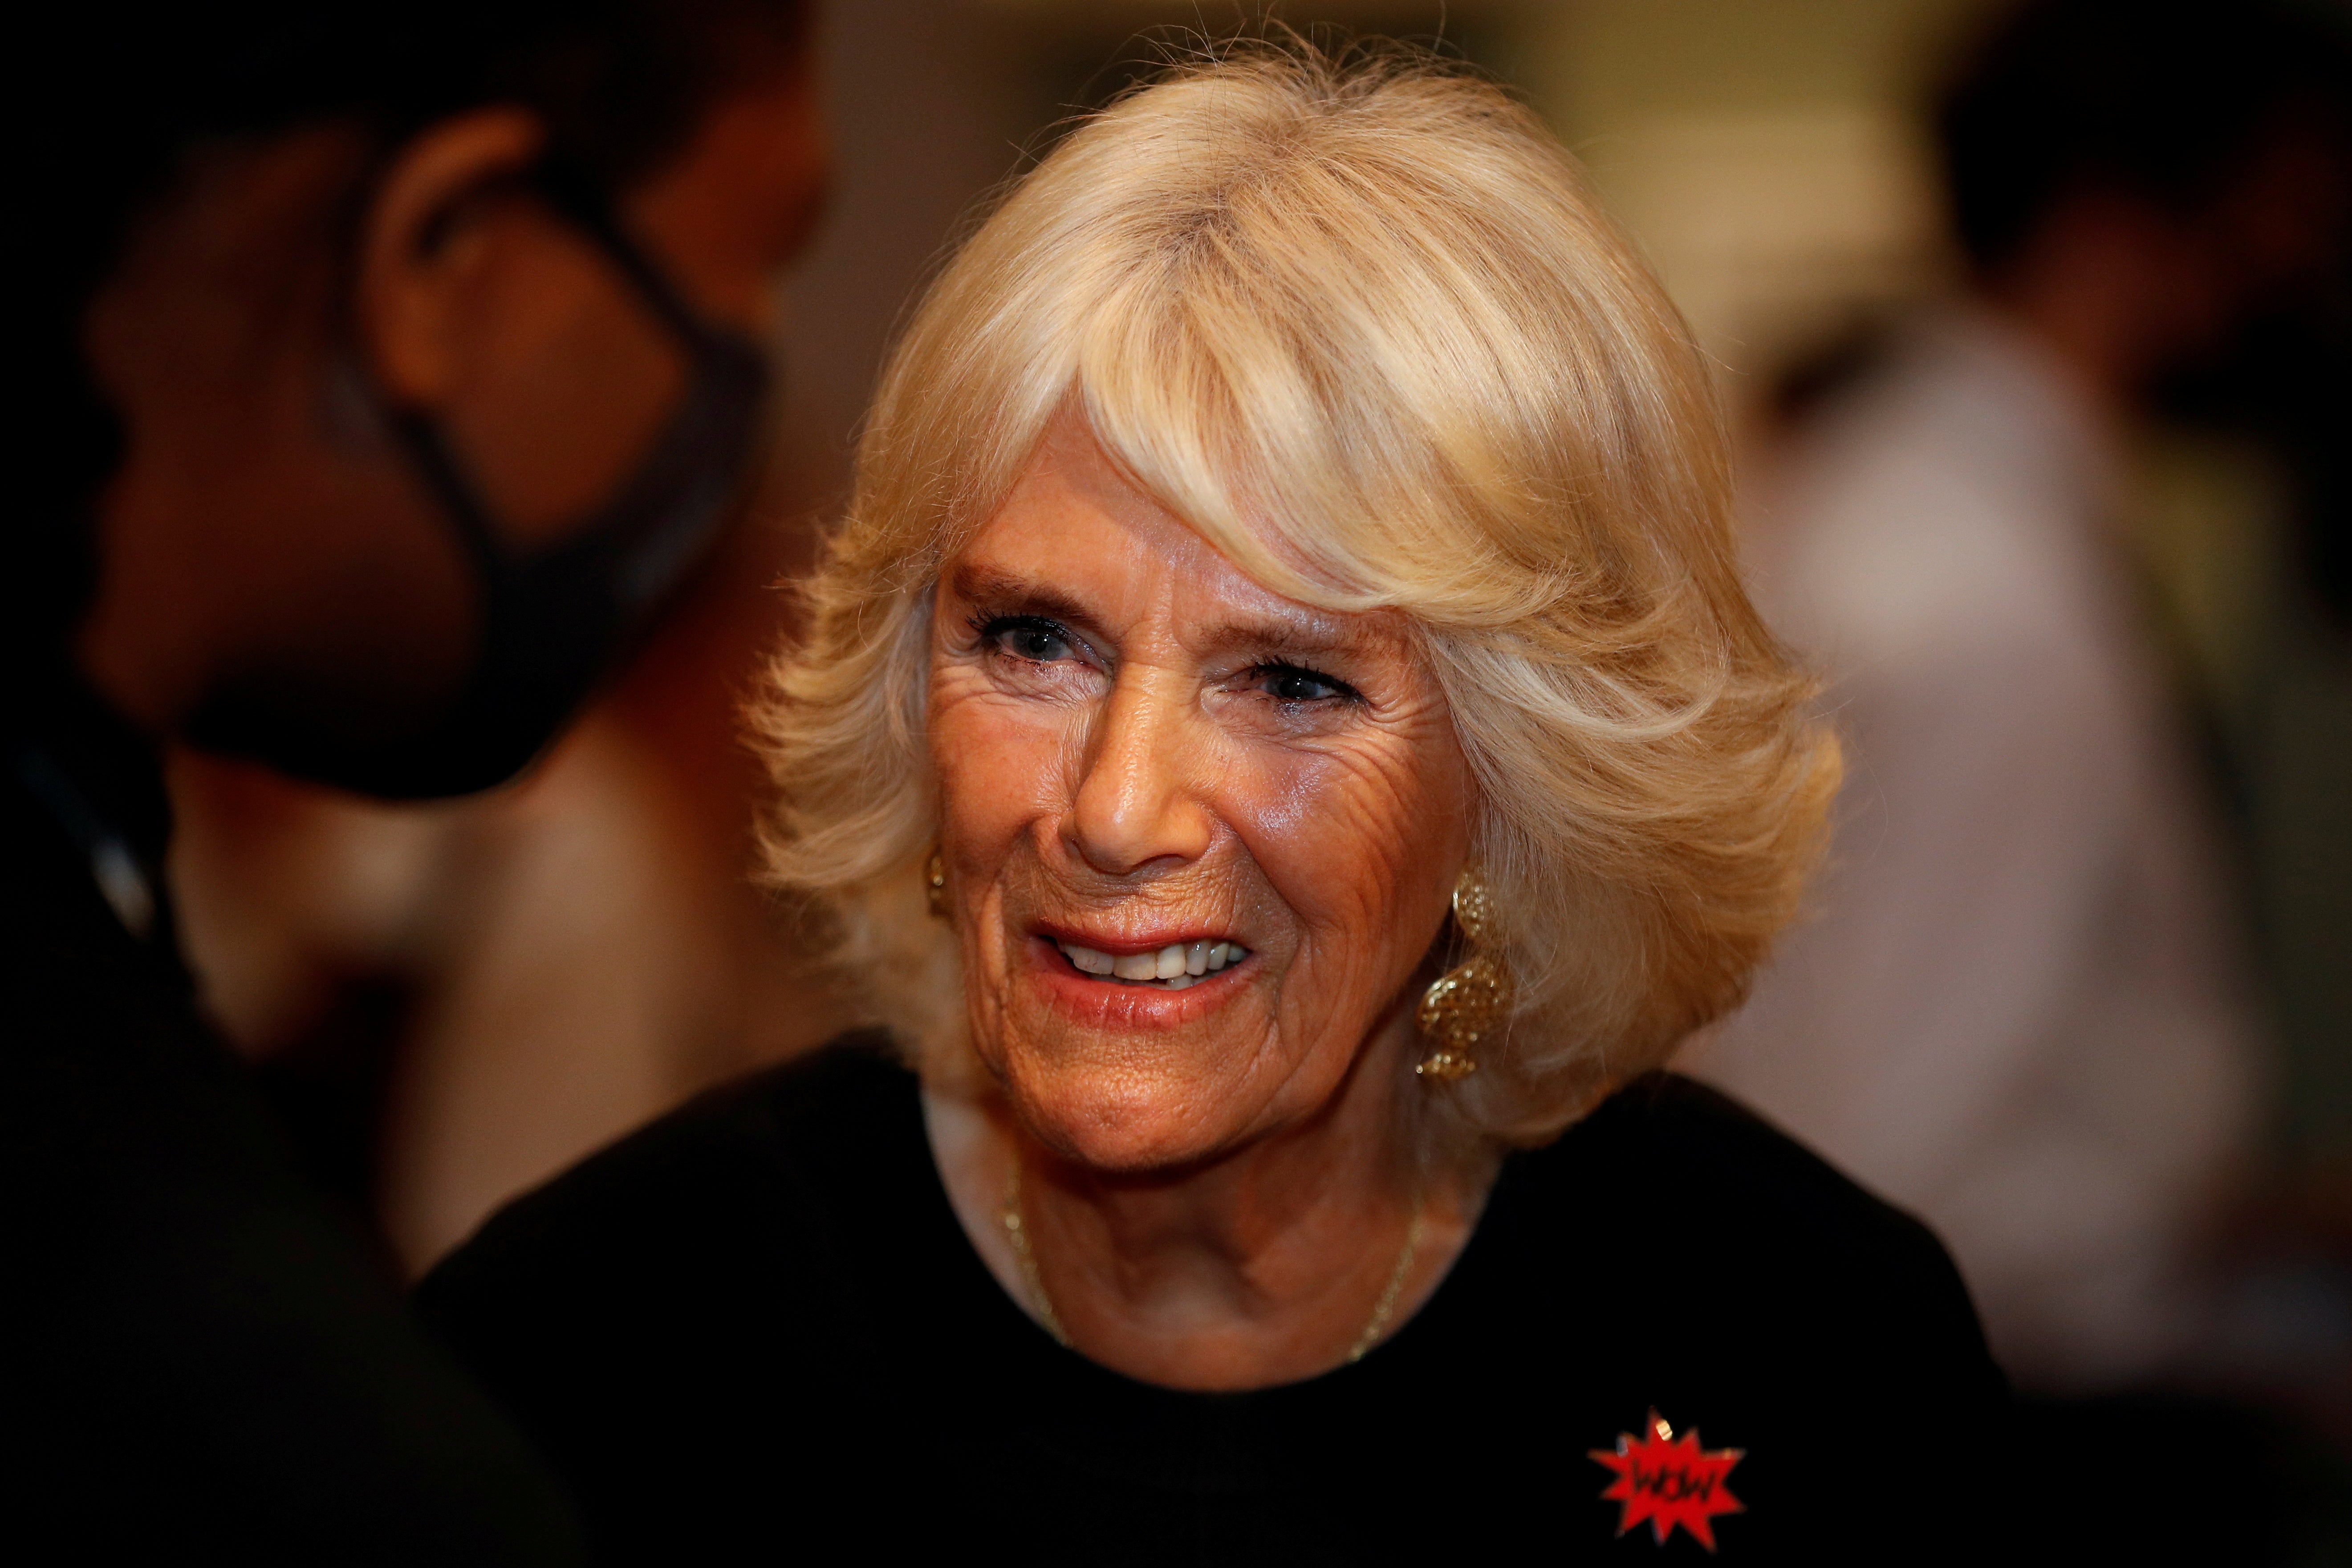 The Duchess of Cornwall pictured at the Shameless! Festival at the Wellcome Collection in London on Wednesday